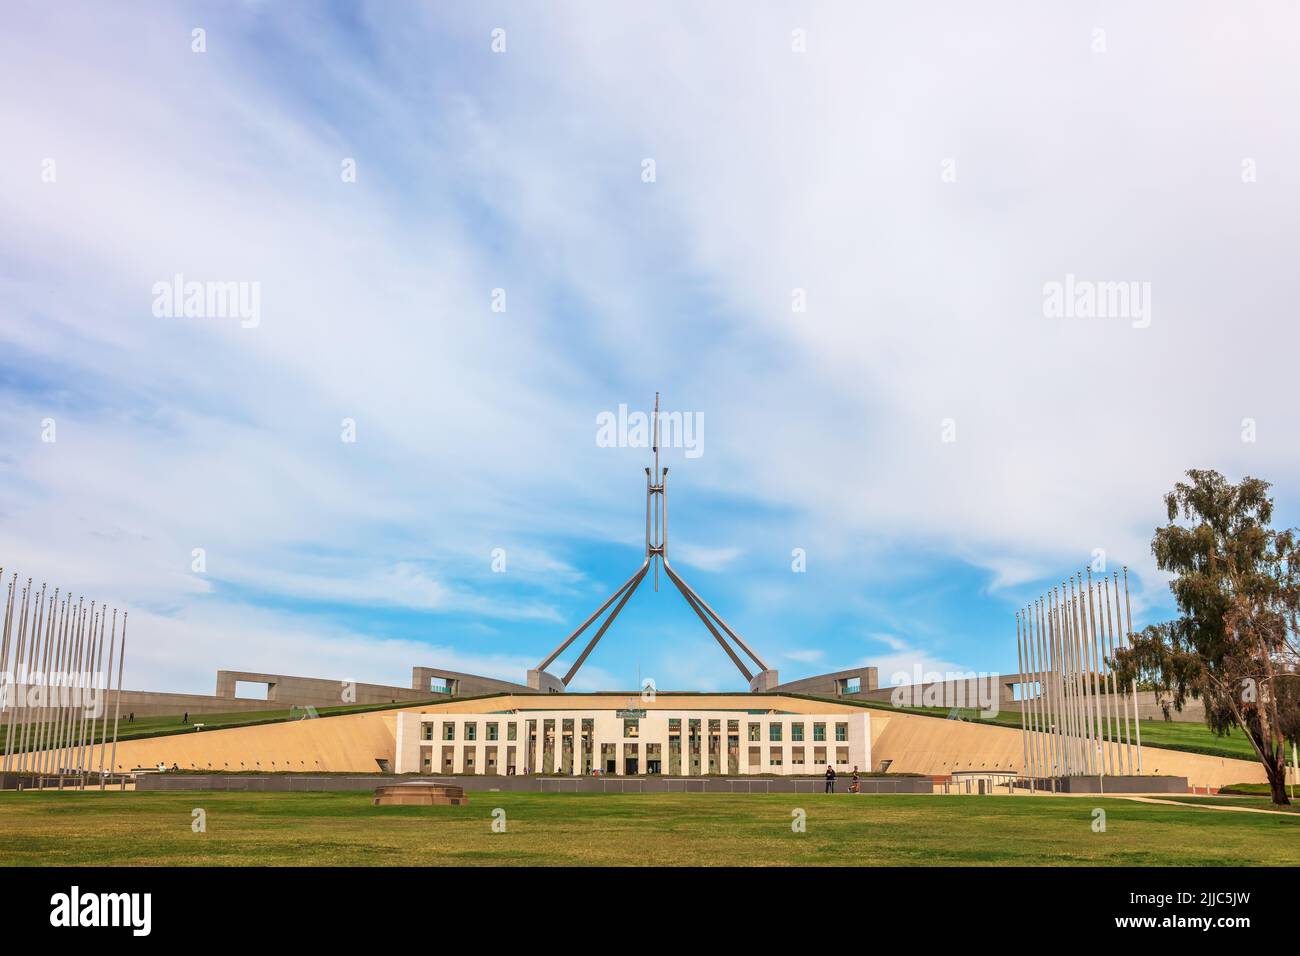 Parliament House, Canberra, Australia was opened on 9 May 1988 by Elizabeth II, it cost more than A$1.1 billion to build. Stock Photo